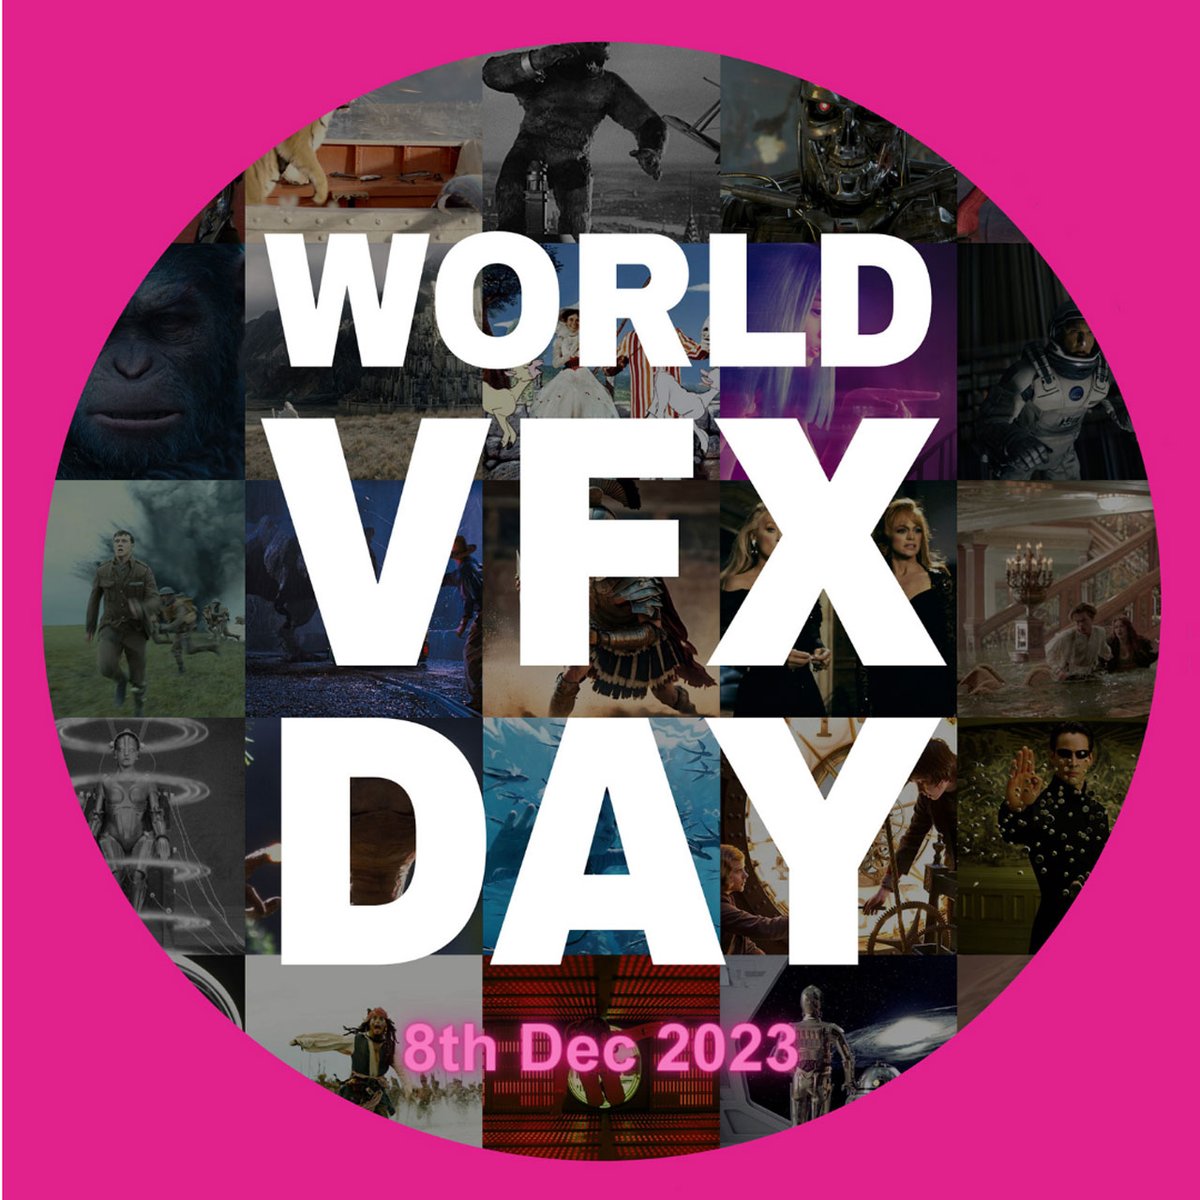 Join us (and apparently everyone else) on 8th December 2023 for the #WorldVFXDay, the DAY the WORLD will learn that even 'we shot everything practically' means 'we replaced a lot with digital VFX' in 99.9% of all cases. Once the WORLD has seen it, it cannot unsee it!